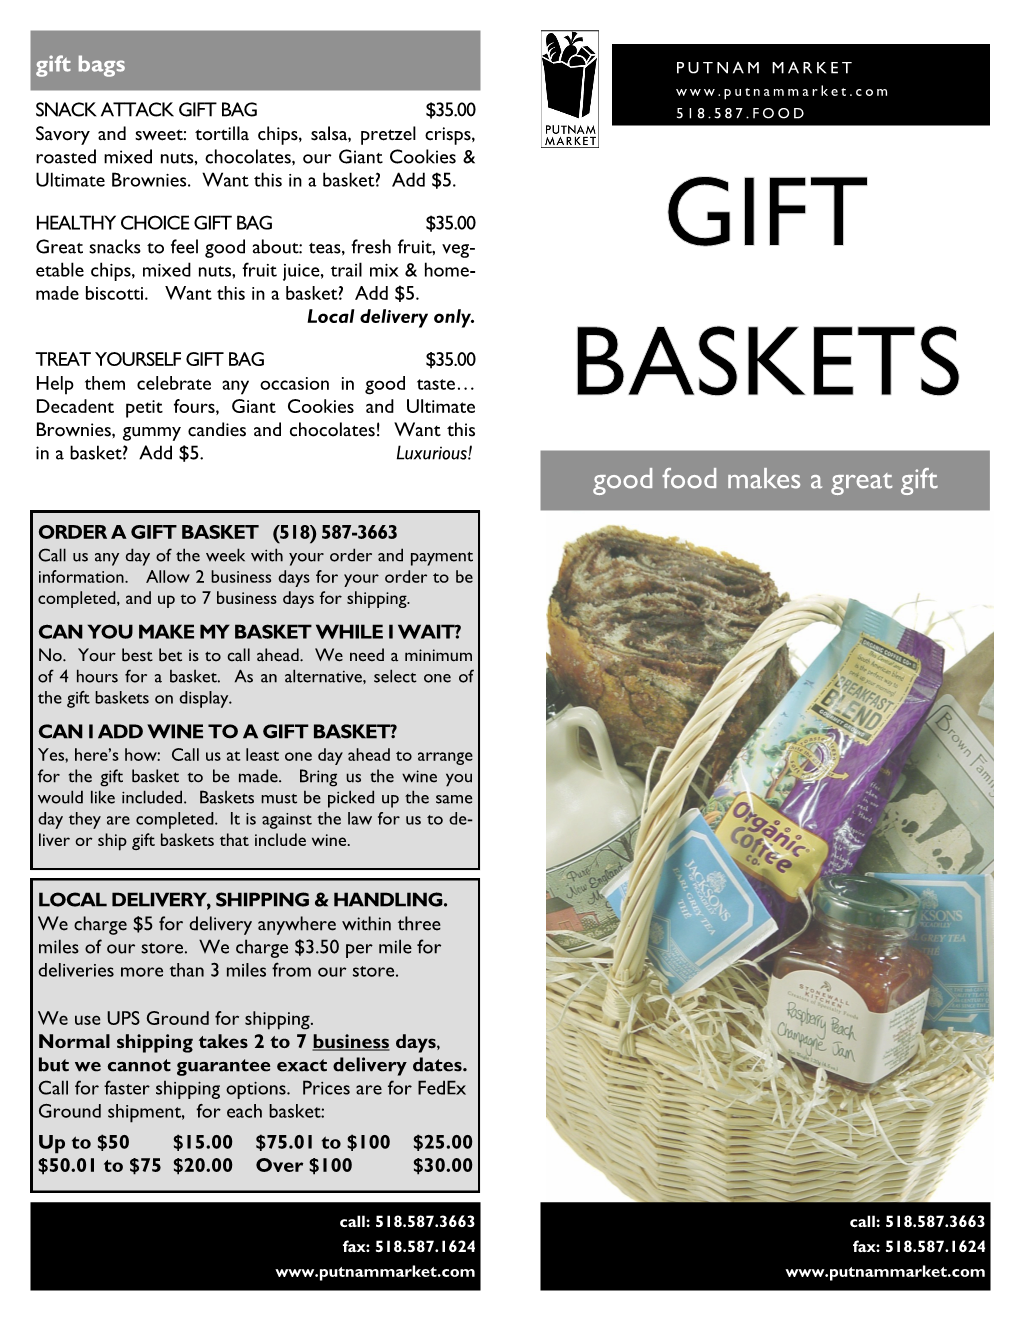 Every Day Gift Baskets